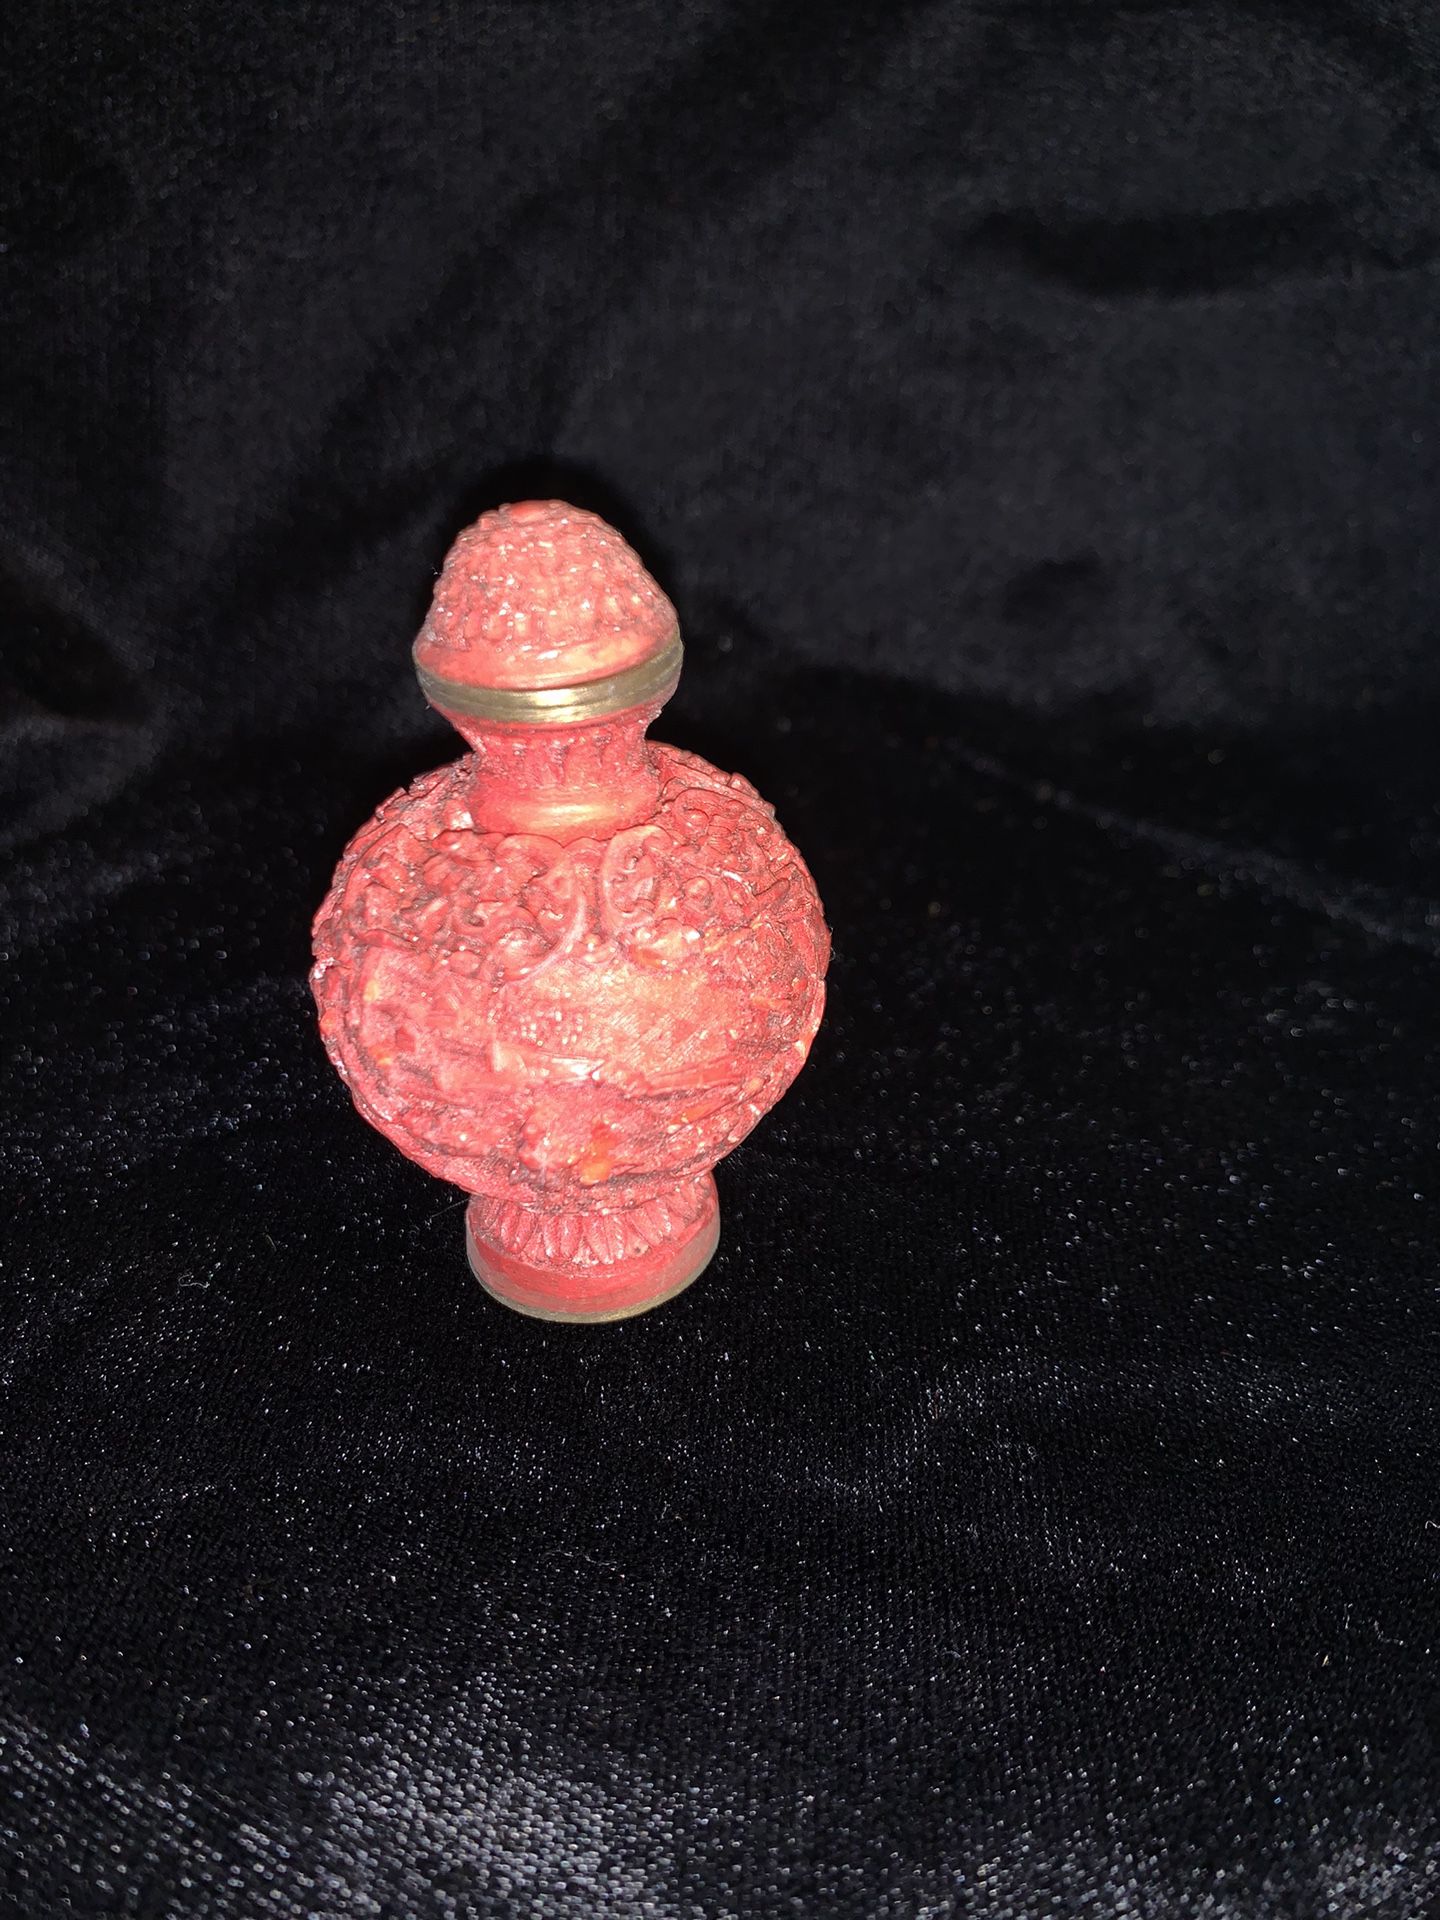 Chinese Snuff Bottle